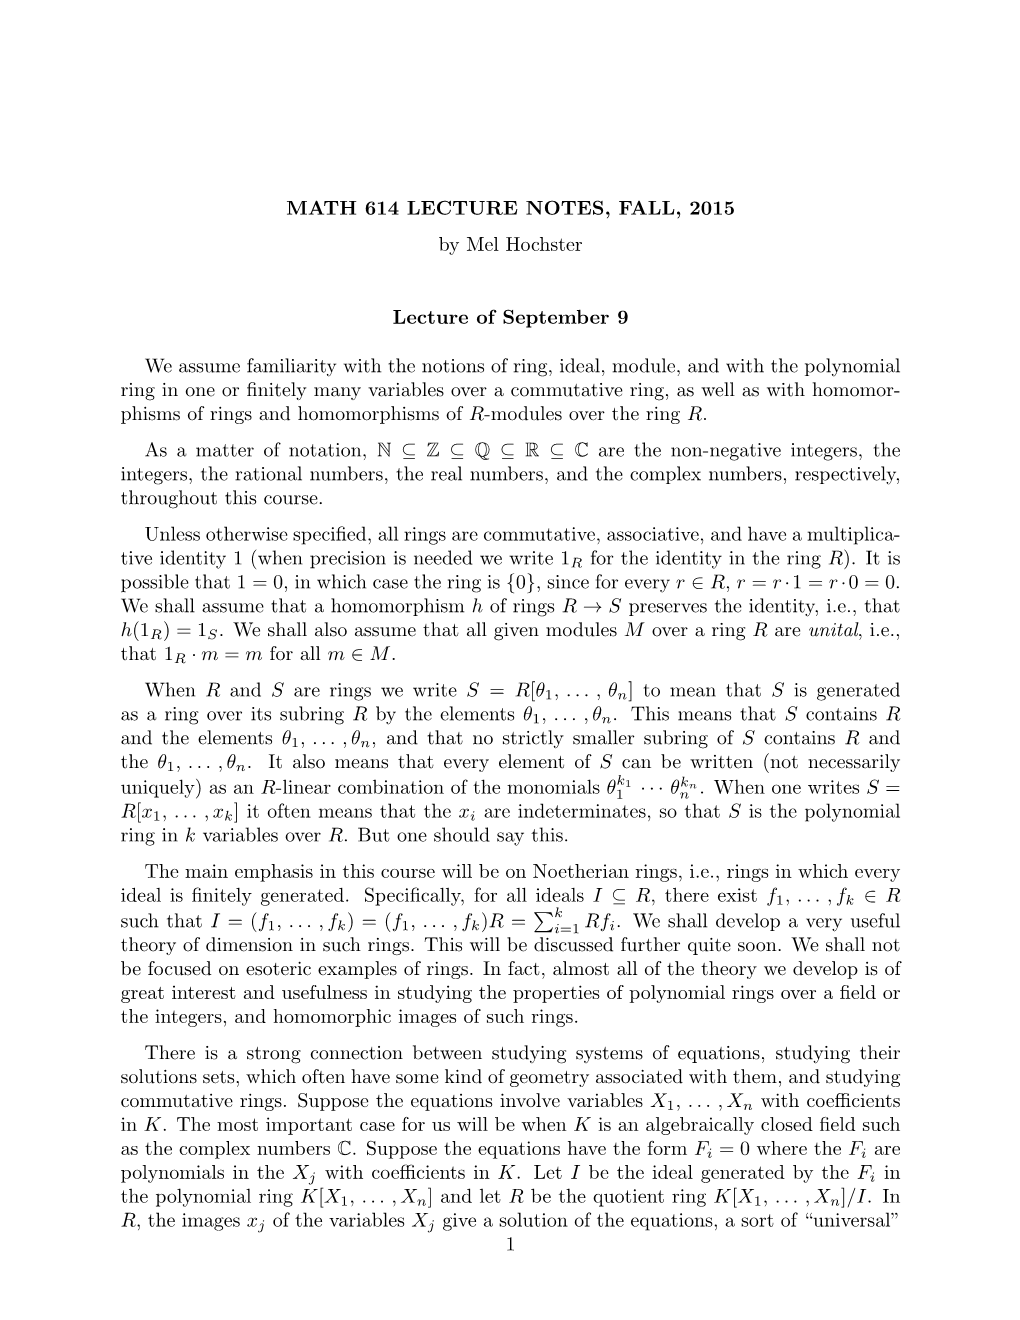 MATH 614 LECTURE NOTES, FALL, 2015 by Mel Hochster